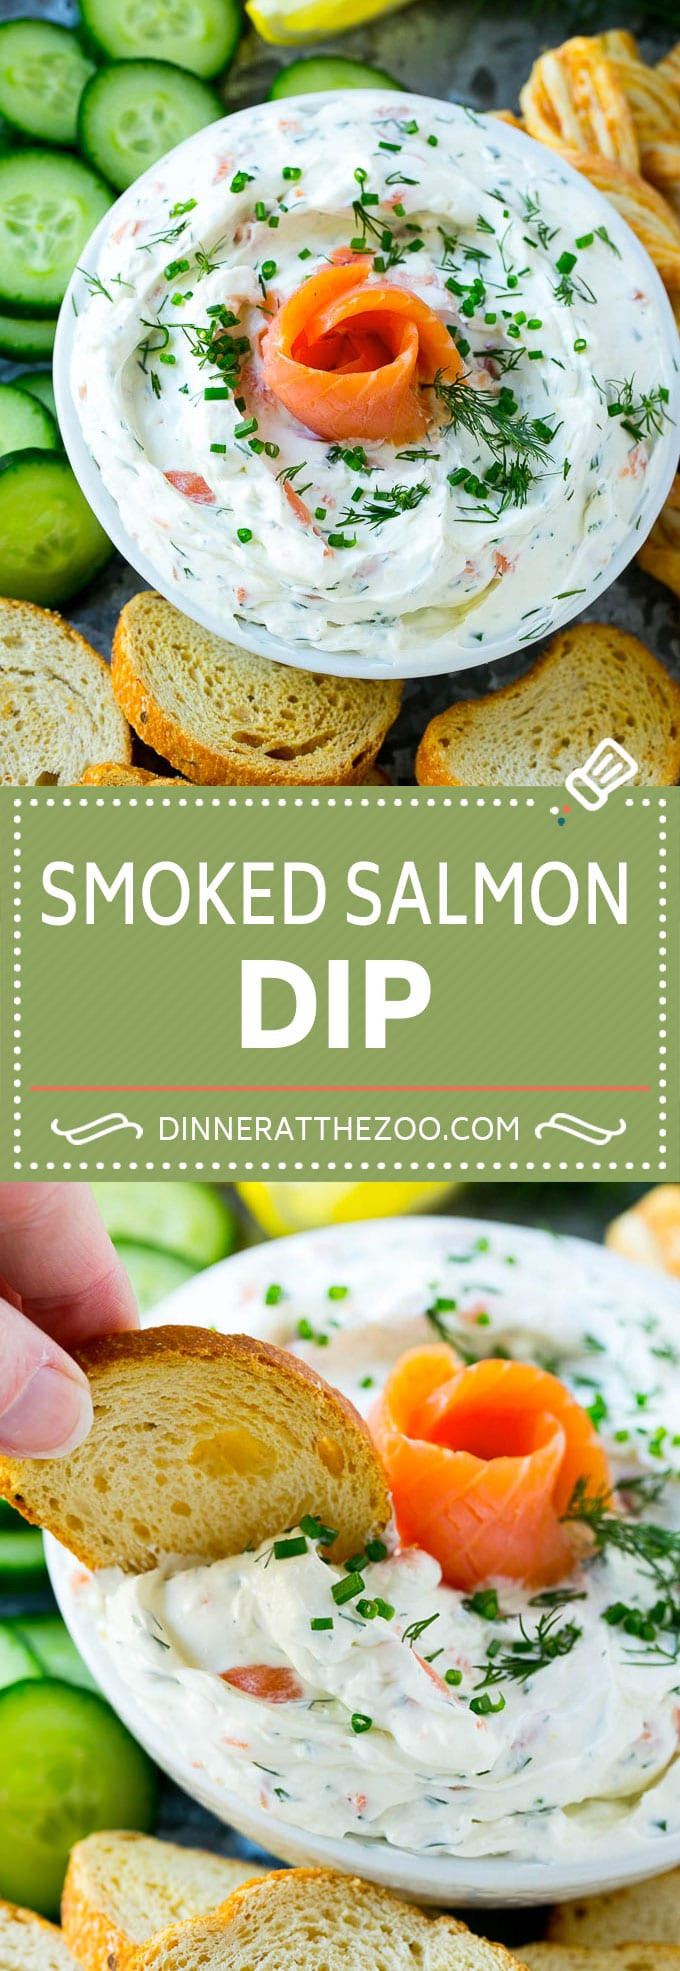 Smoked Salmon Appetizers Allrecipes
 Smoked Salmon Dip Dinner at the Zoo